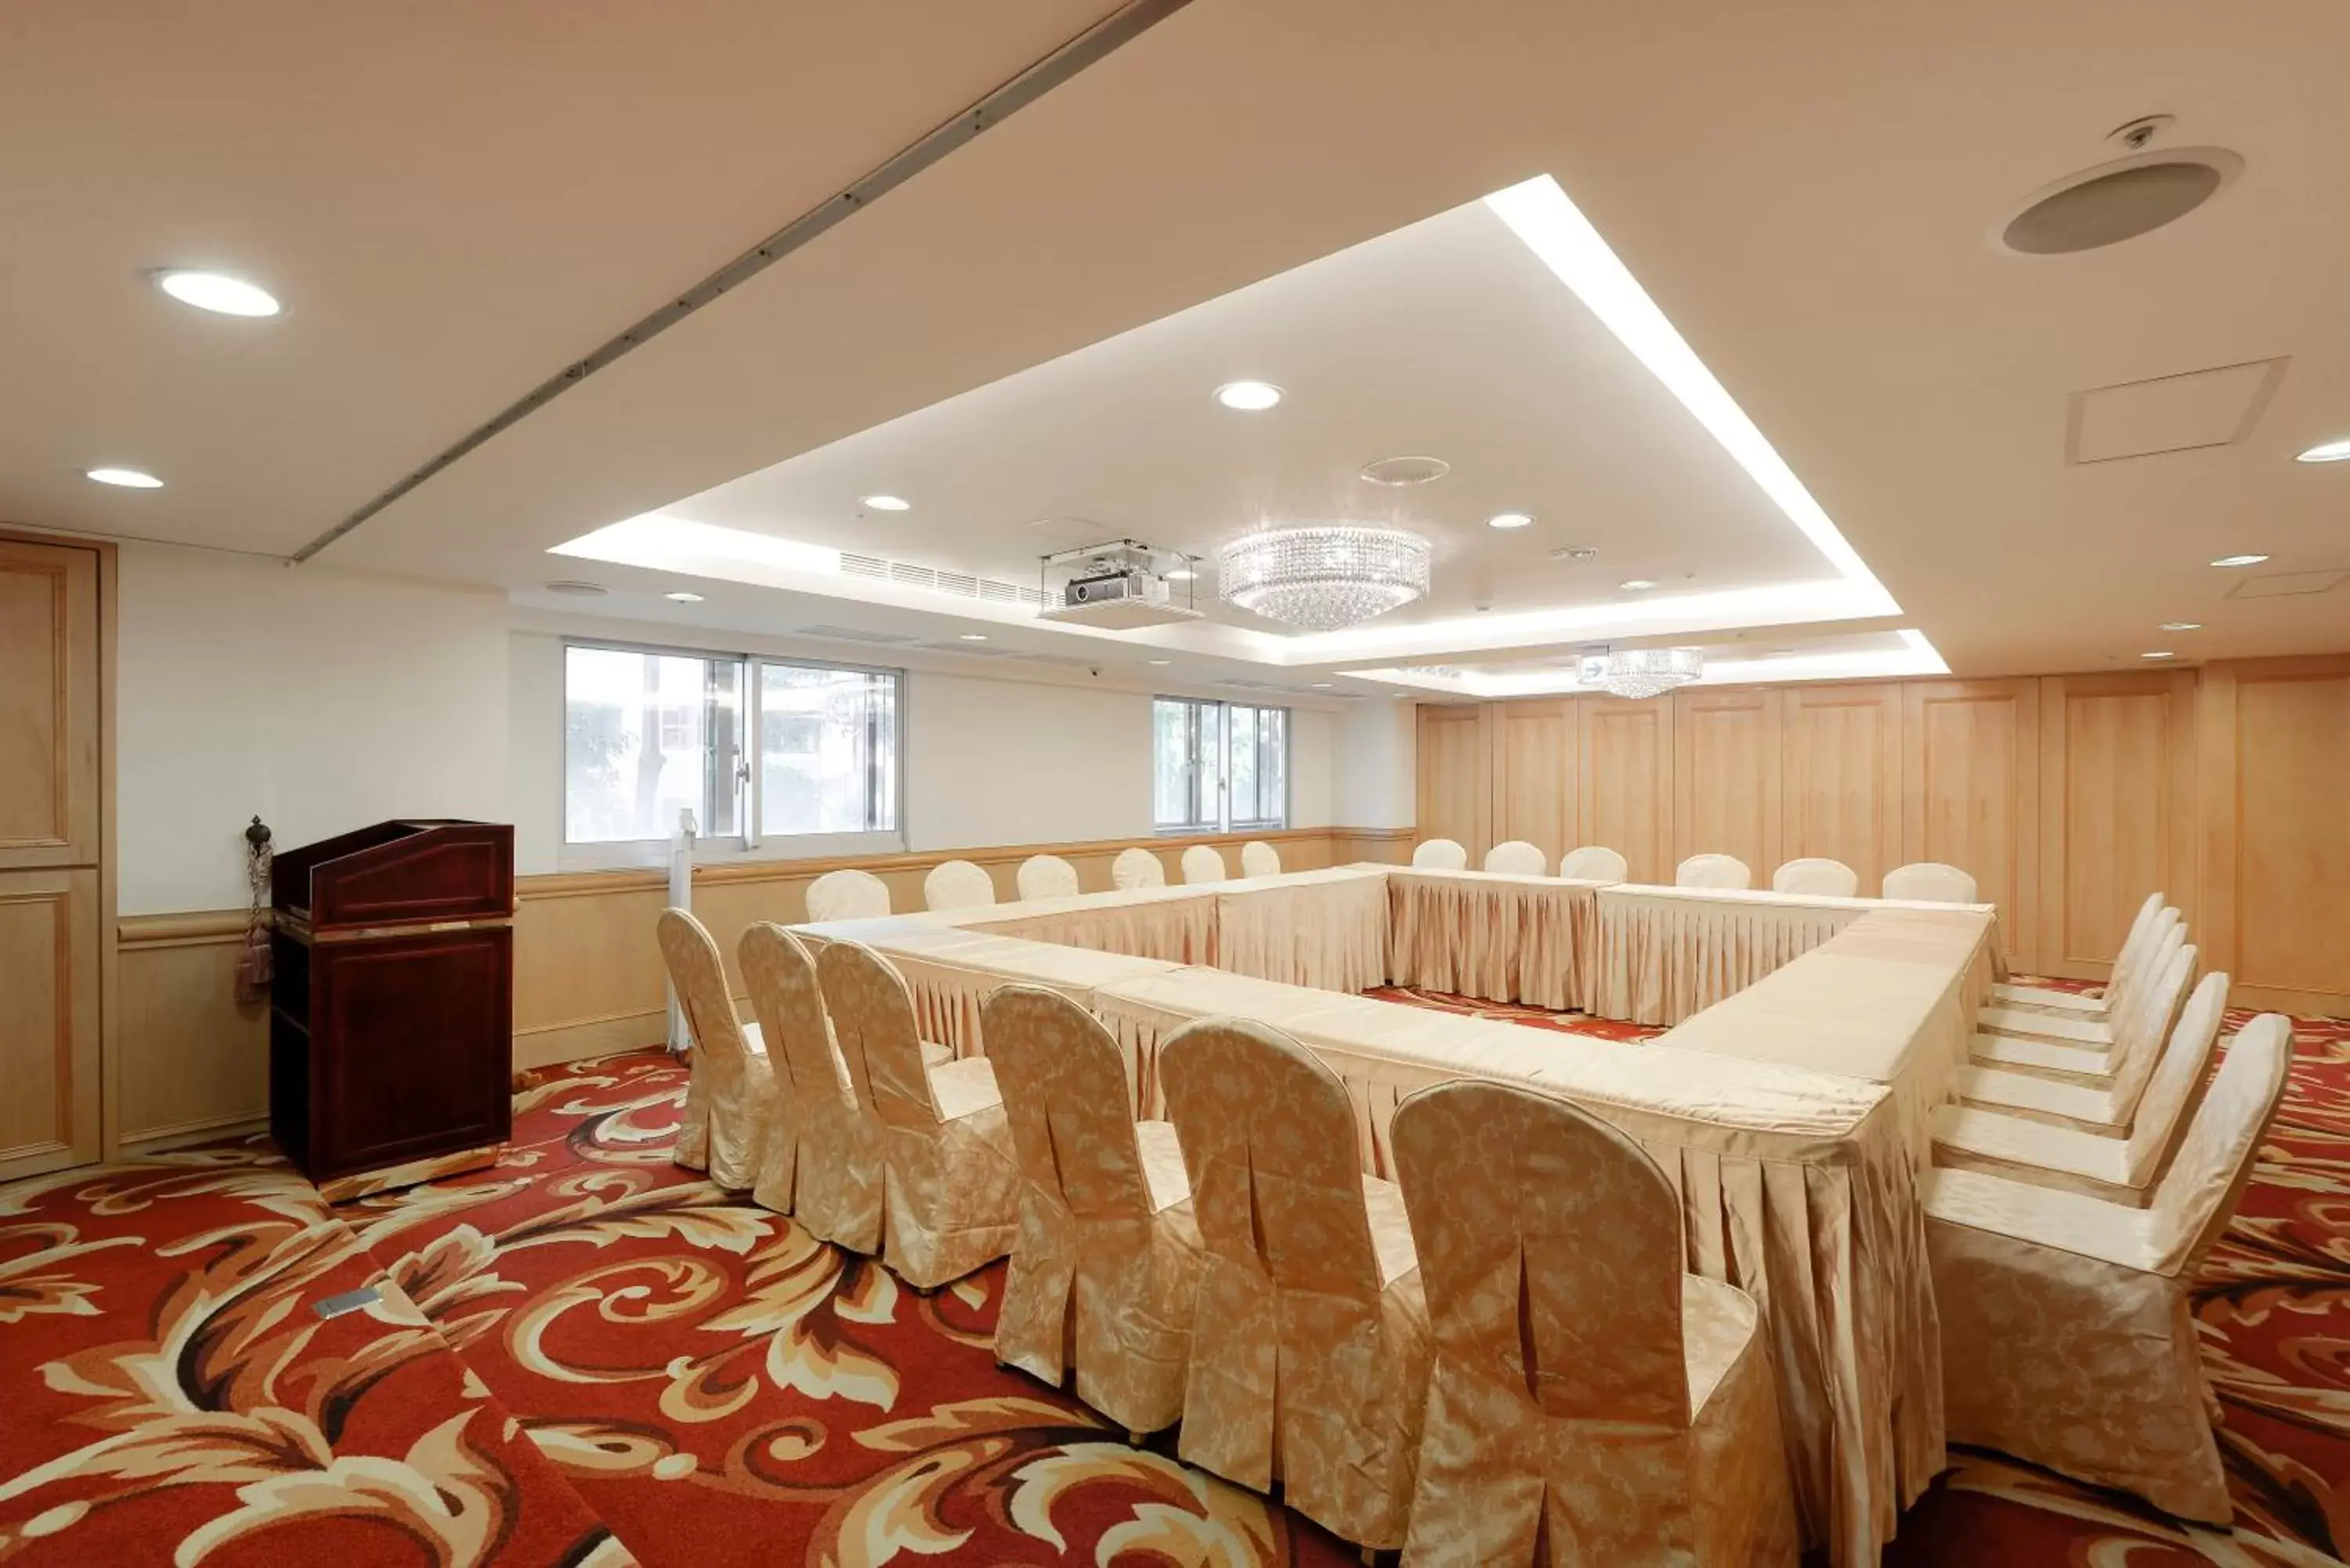 Meeting/conference room in Hotel Sunshine